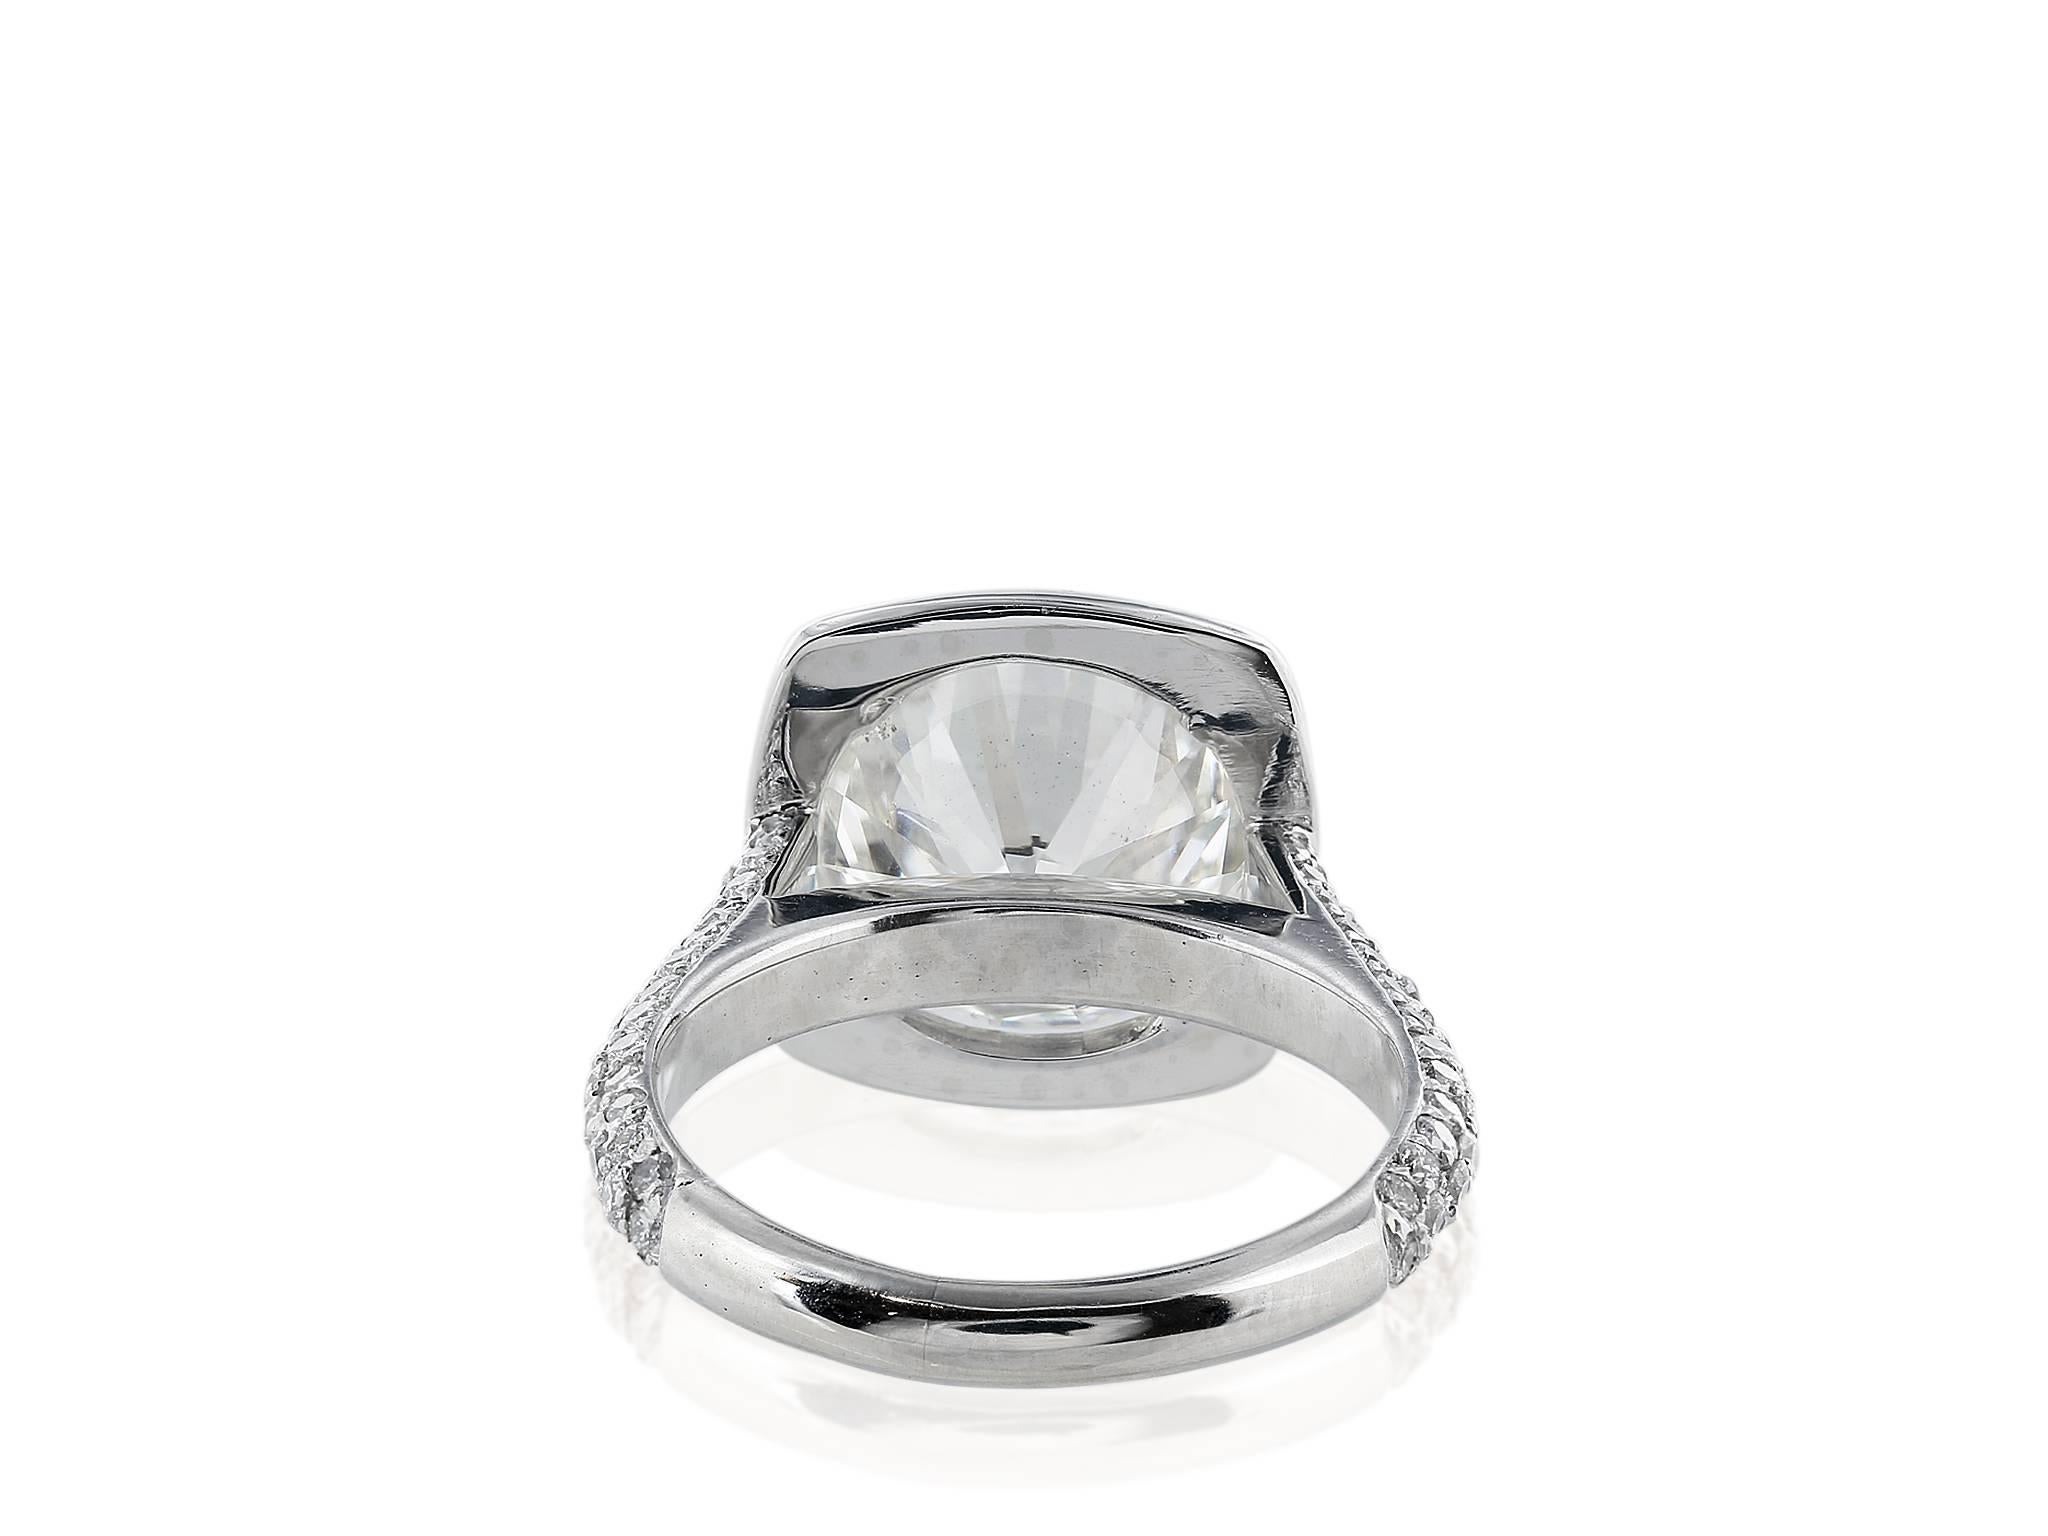 5.02 Carat J/SI1 GIA Certified Round Diamond Platinum Ring In Excellent Condition For Sale In Chestnut Hill, MA